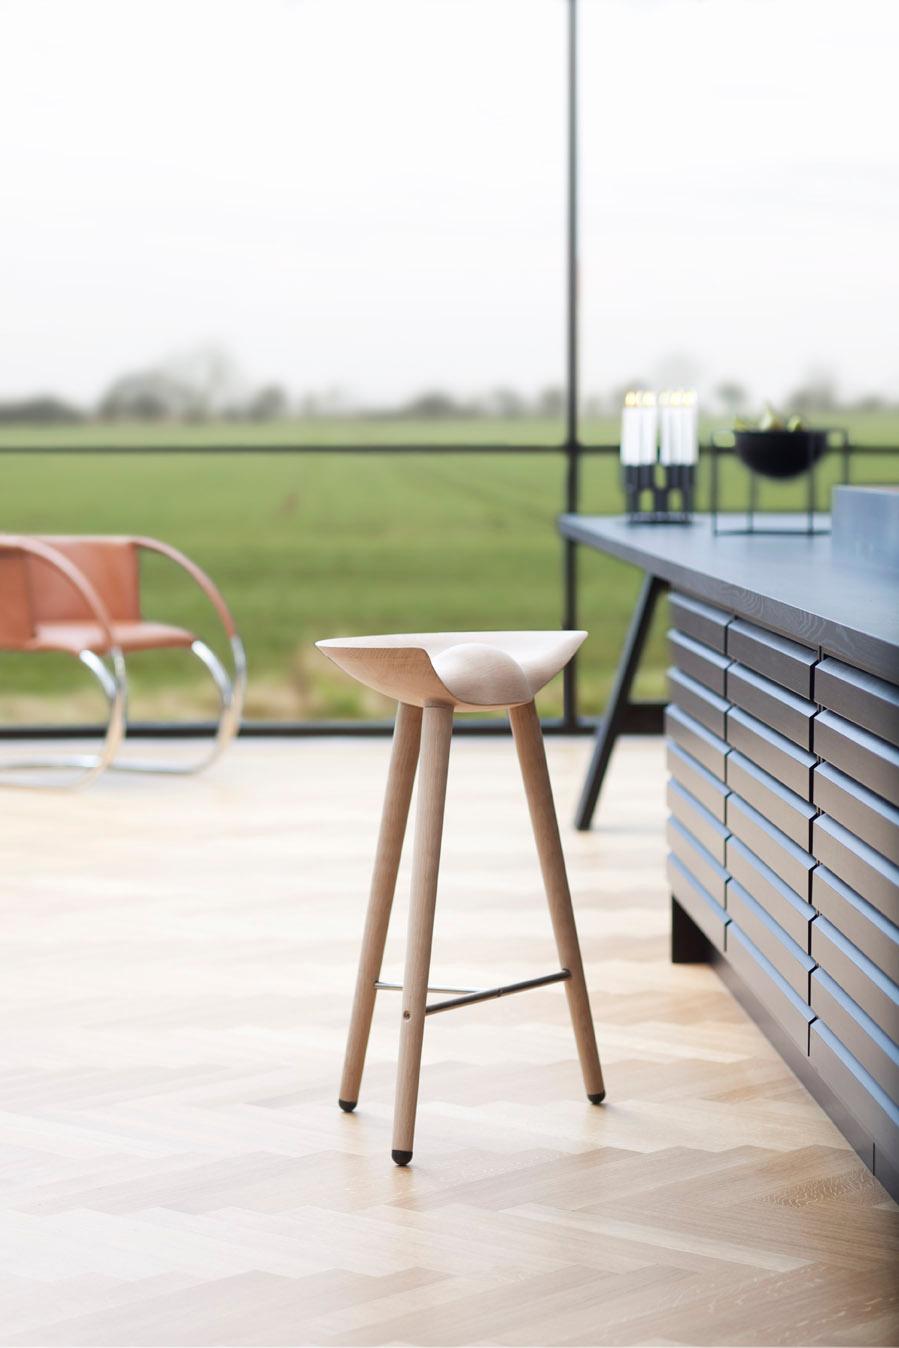 Black Beech and Stainless Steel Counter Stool by Lassen
Dimensions: H 69 x W 36 x L 55.5 cm
Materials: Beech, Stainless Steel

In 1942 Mogens Lassen designed the Stool ML42 as a piece for a furniture exhibition held at the Danish Museum of